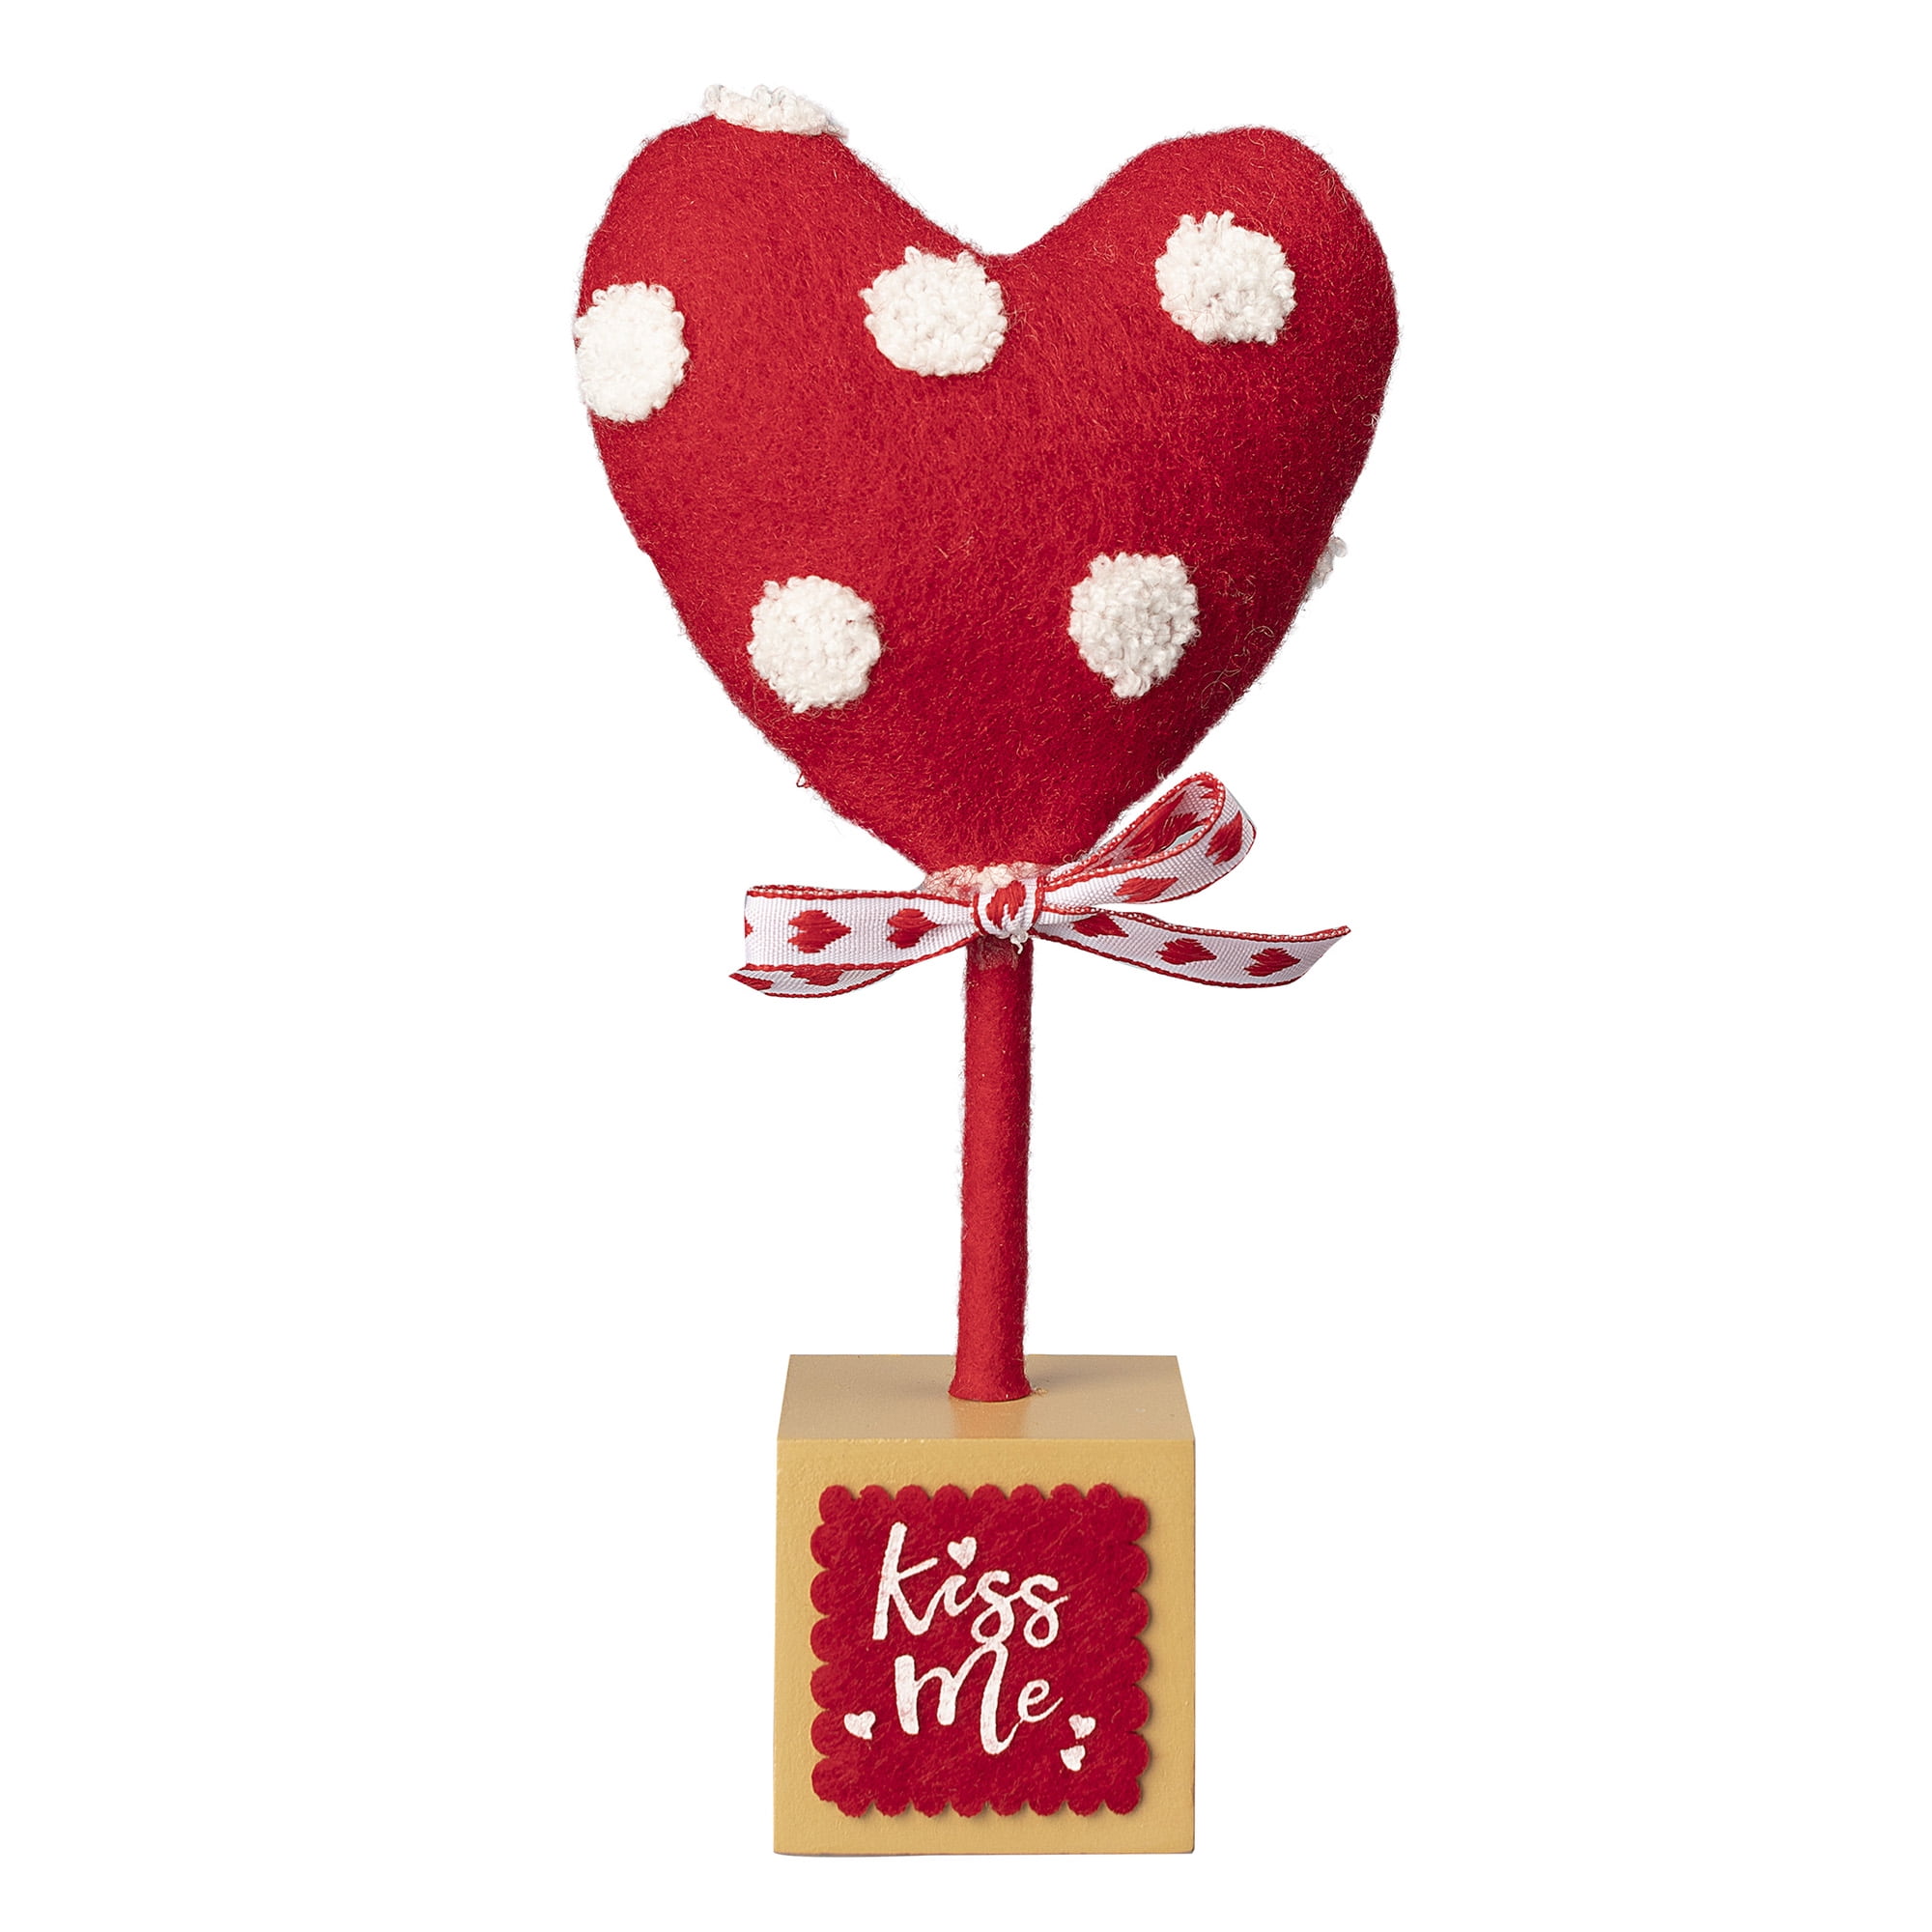 WAY TO CELEBRATE! Way to Celebrate Valentine's Day Small Red Fabric Heart Tabletop Decoration, 8.5" Tall